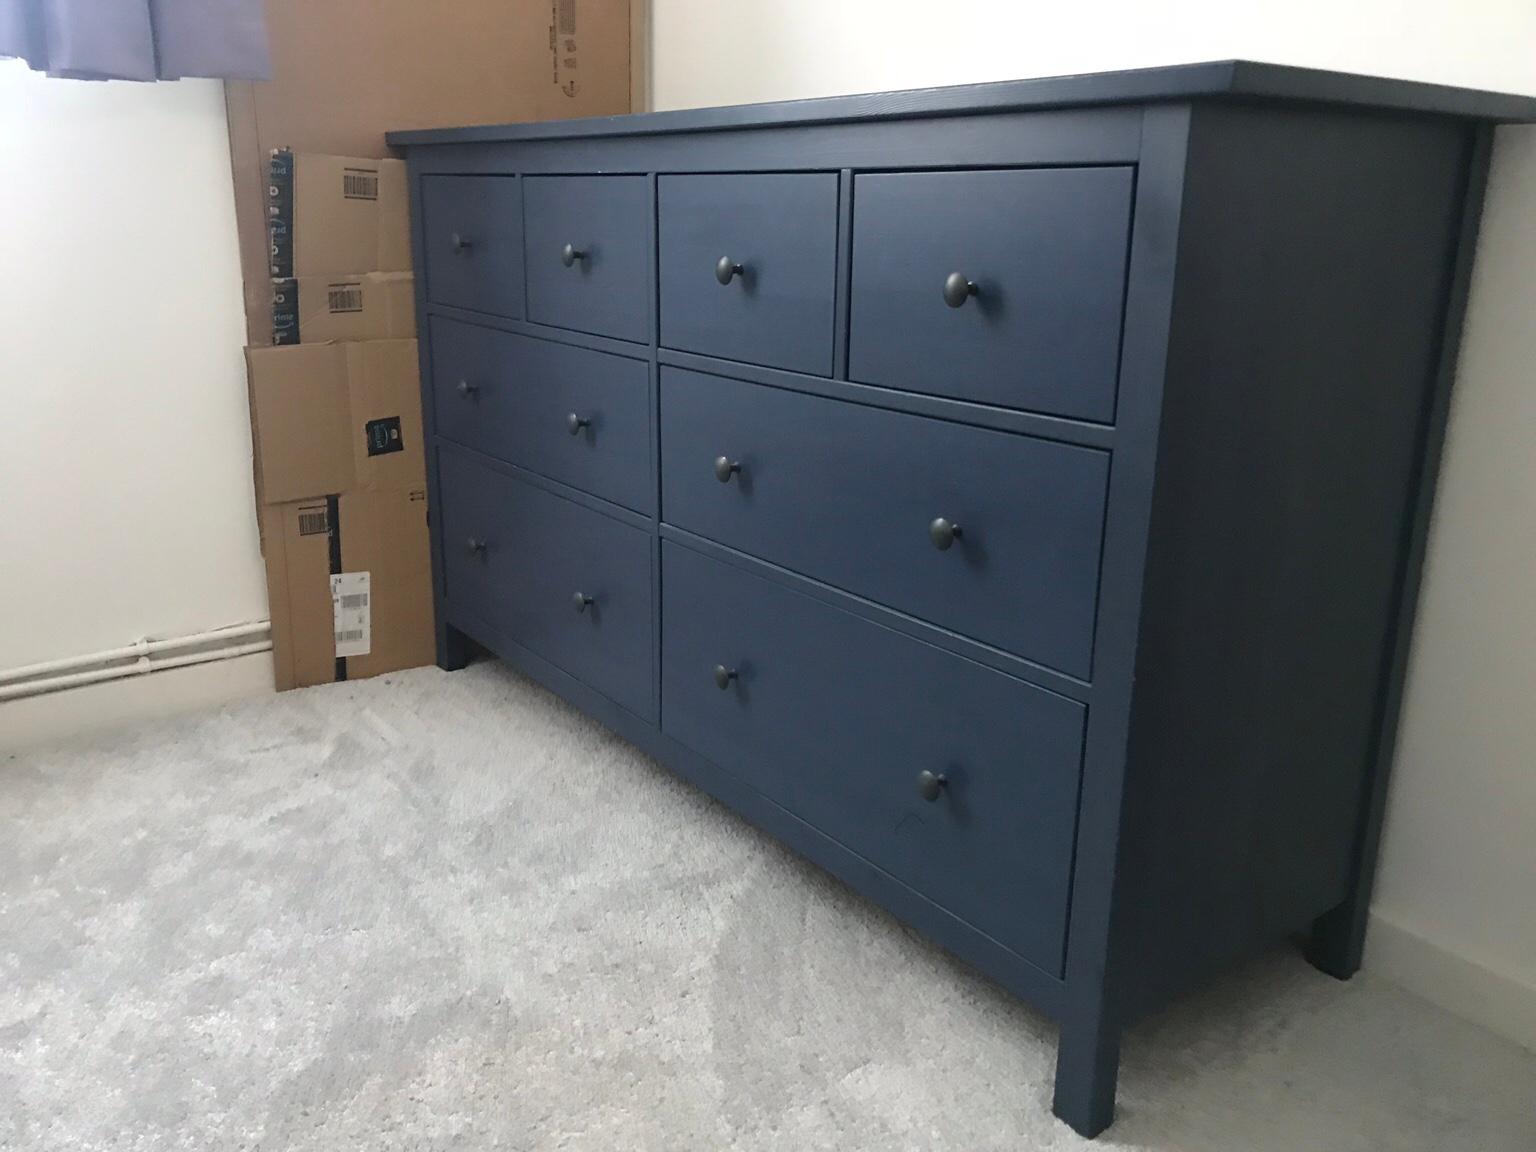 Ikea Hemnes Chest Of 8 Drawers In Sw15 London For 130 00 For Sale